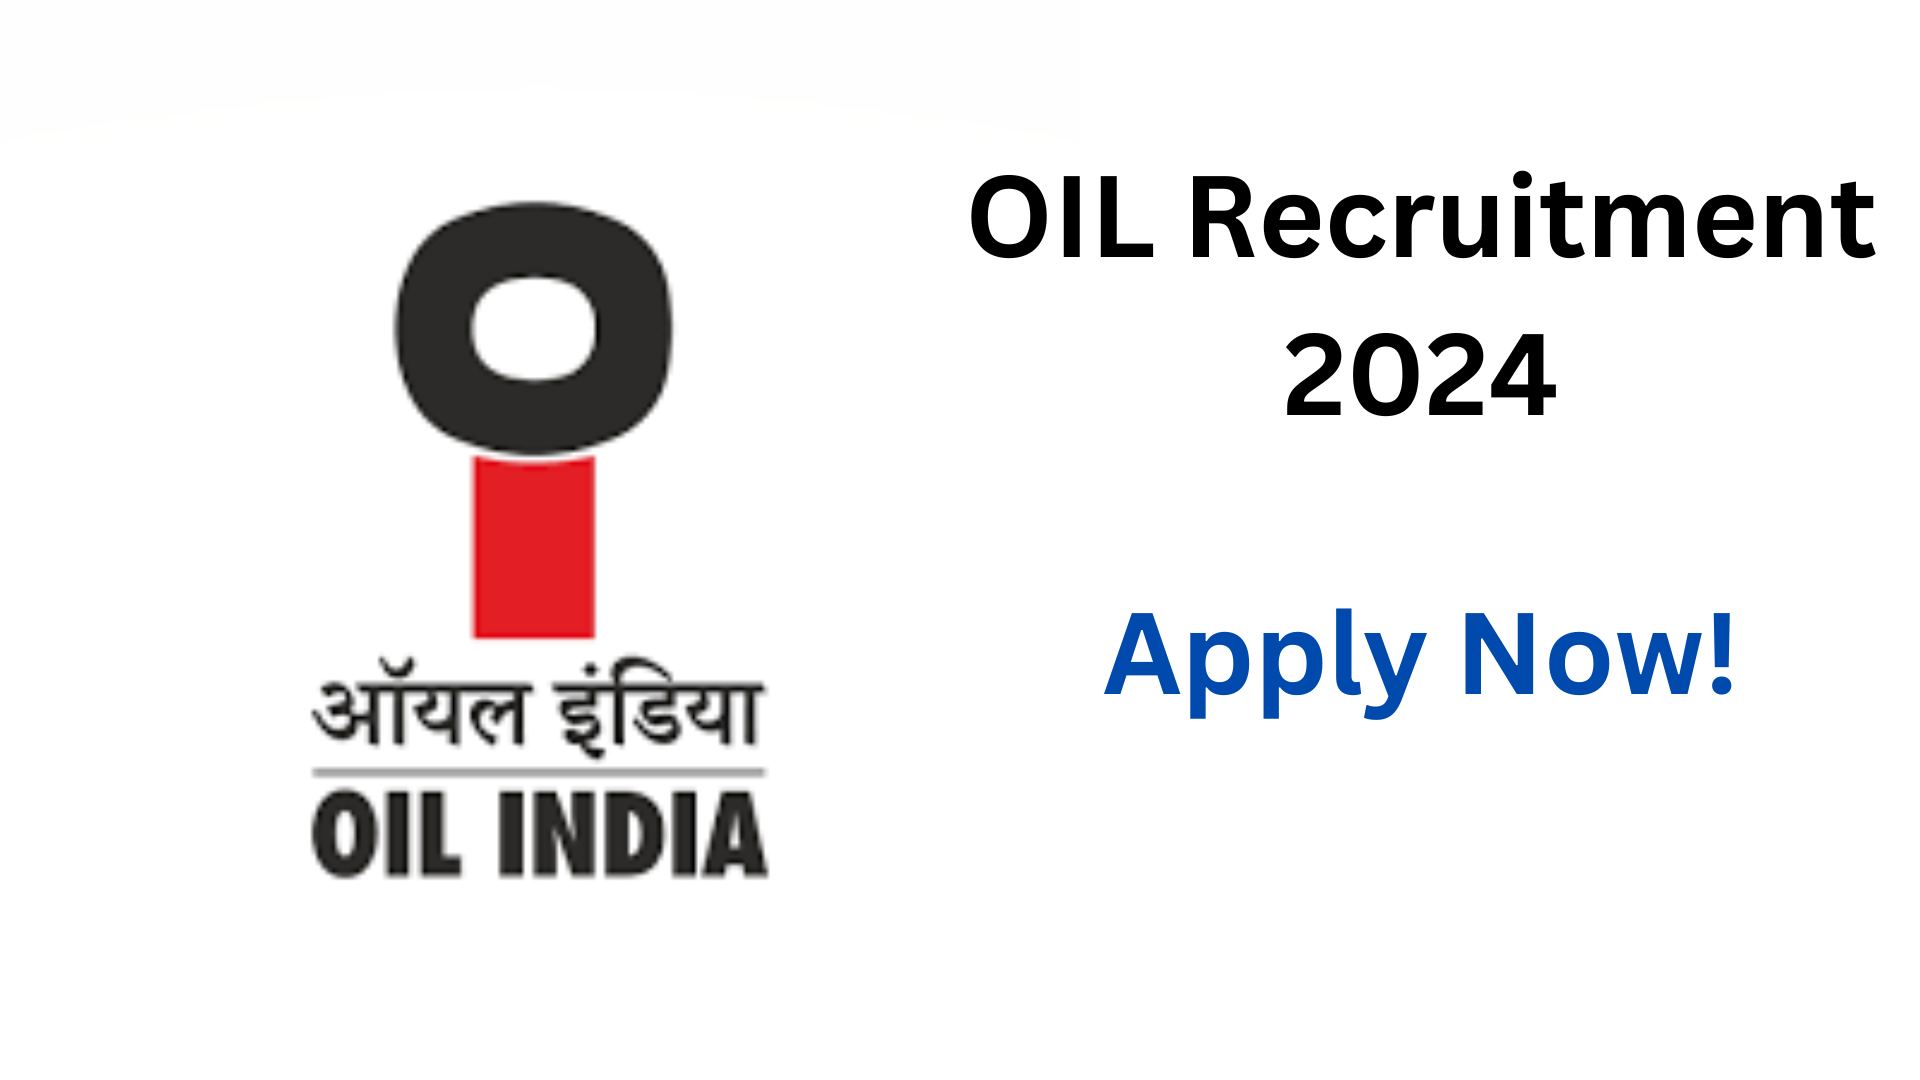 OIL Recruitment 2024, Apply Now, Salary Up To 1,10,000, Apply Now, Eligibility Criteria and More